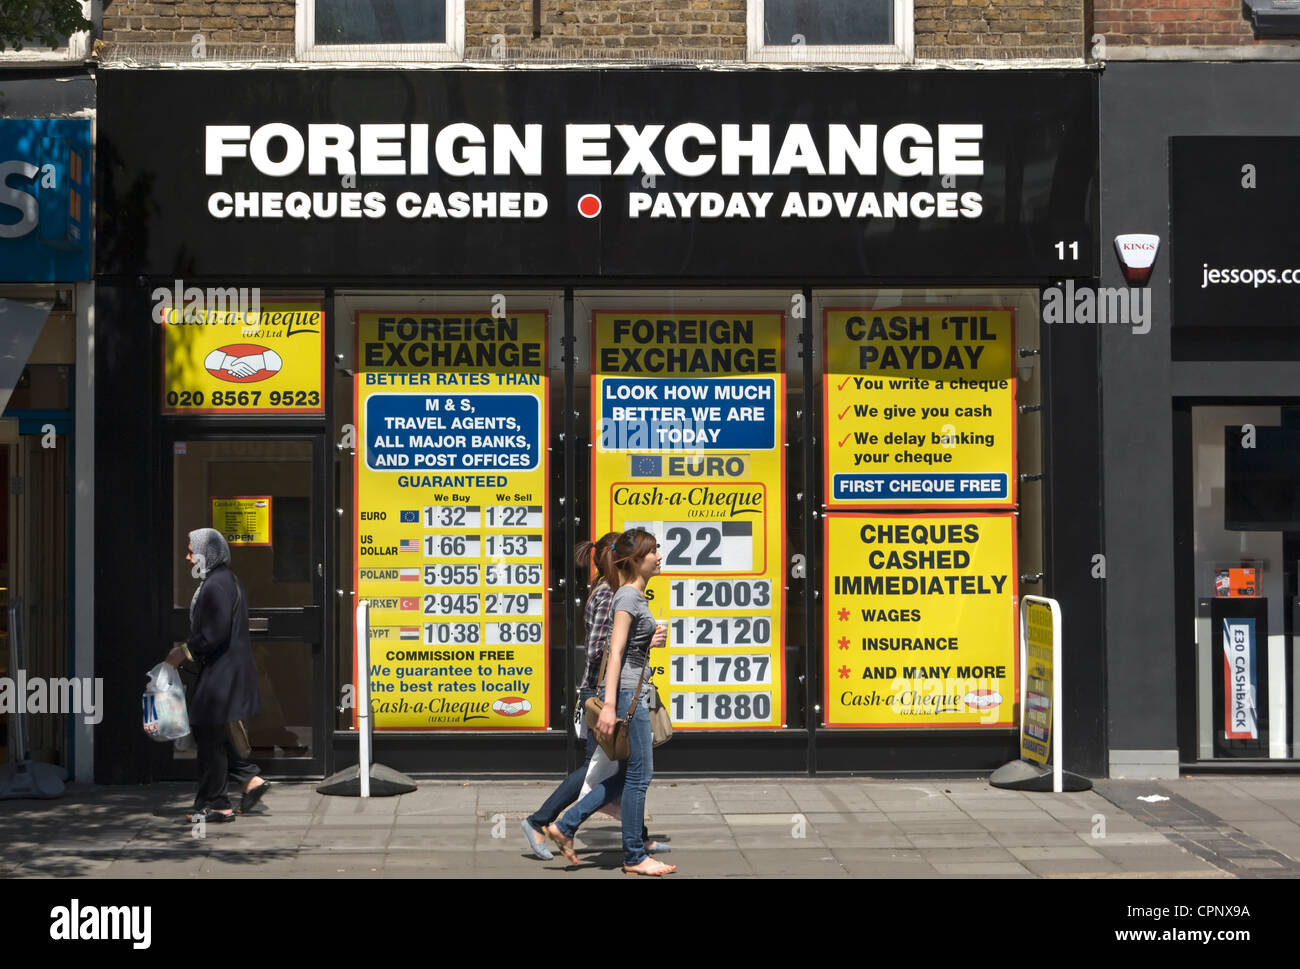 high street shop providing payday advances, loans, cheque cashing and foreign exchange, ealing, london, england Stock Photo